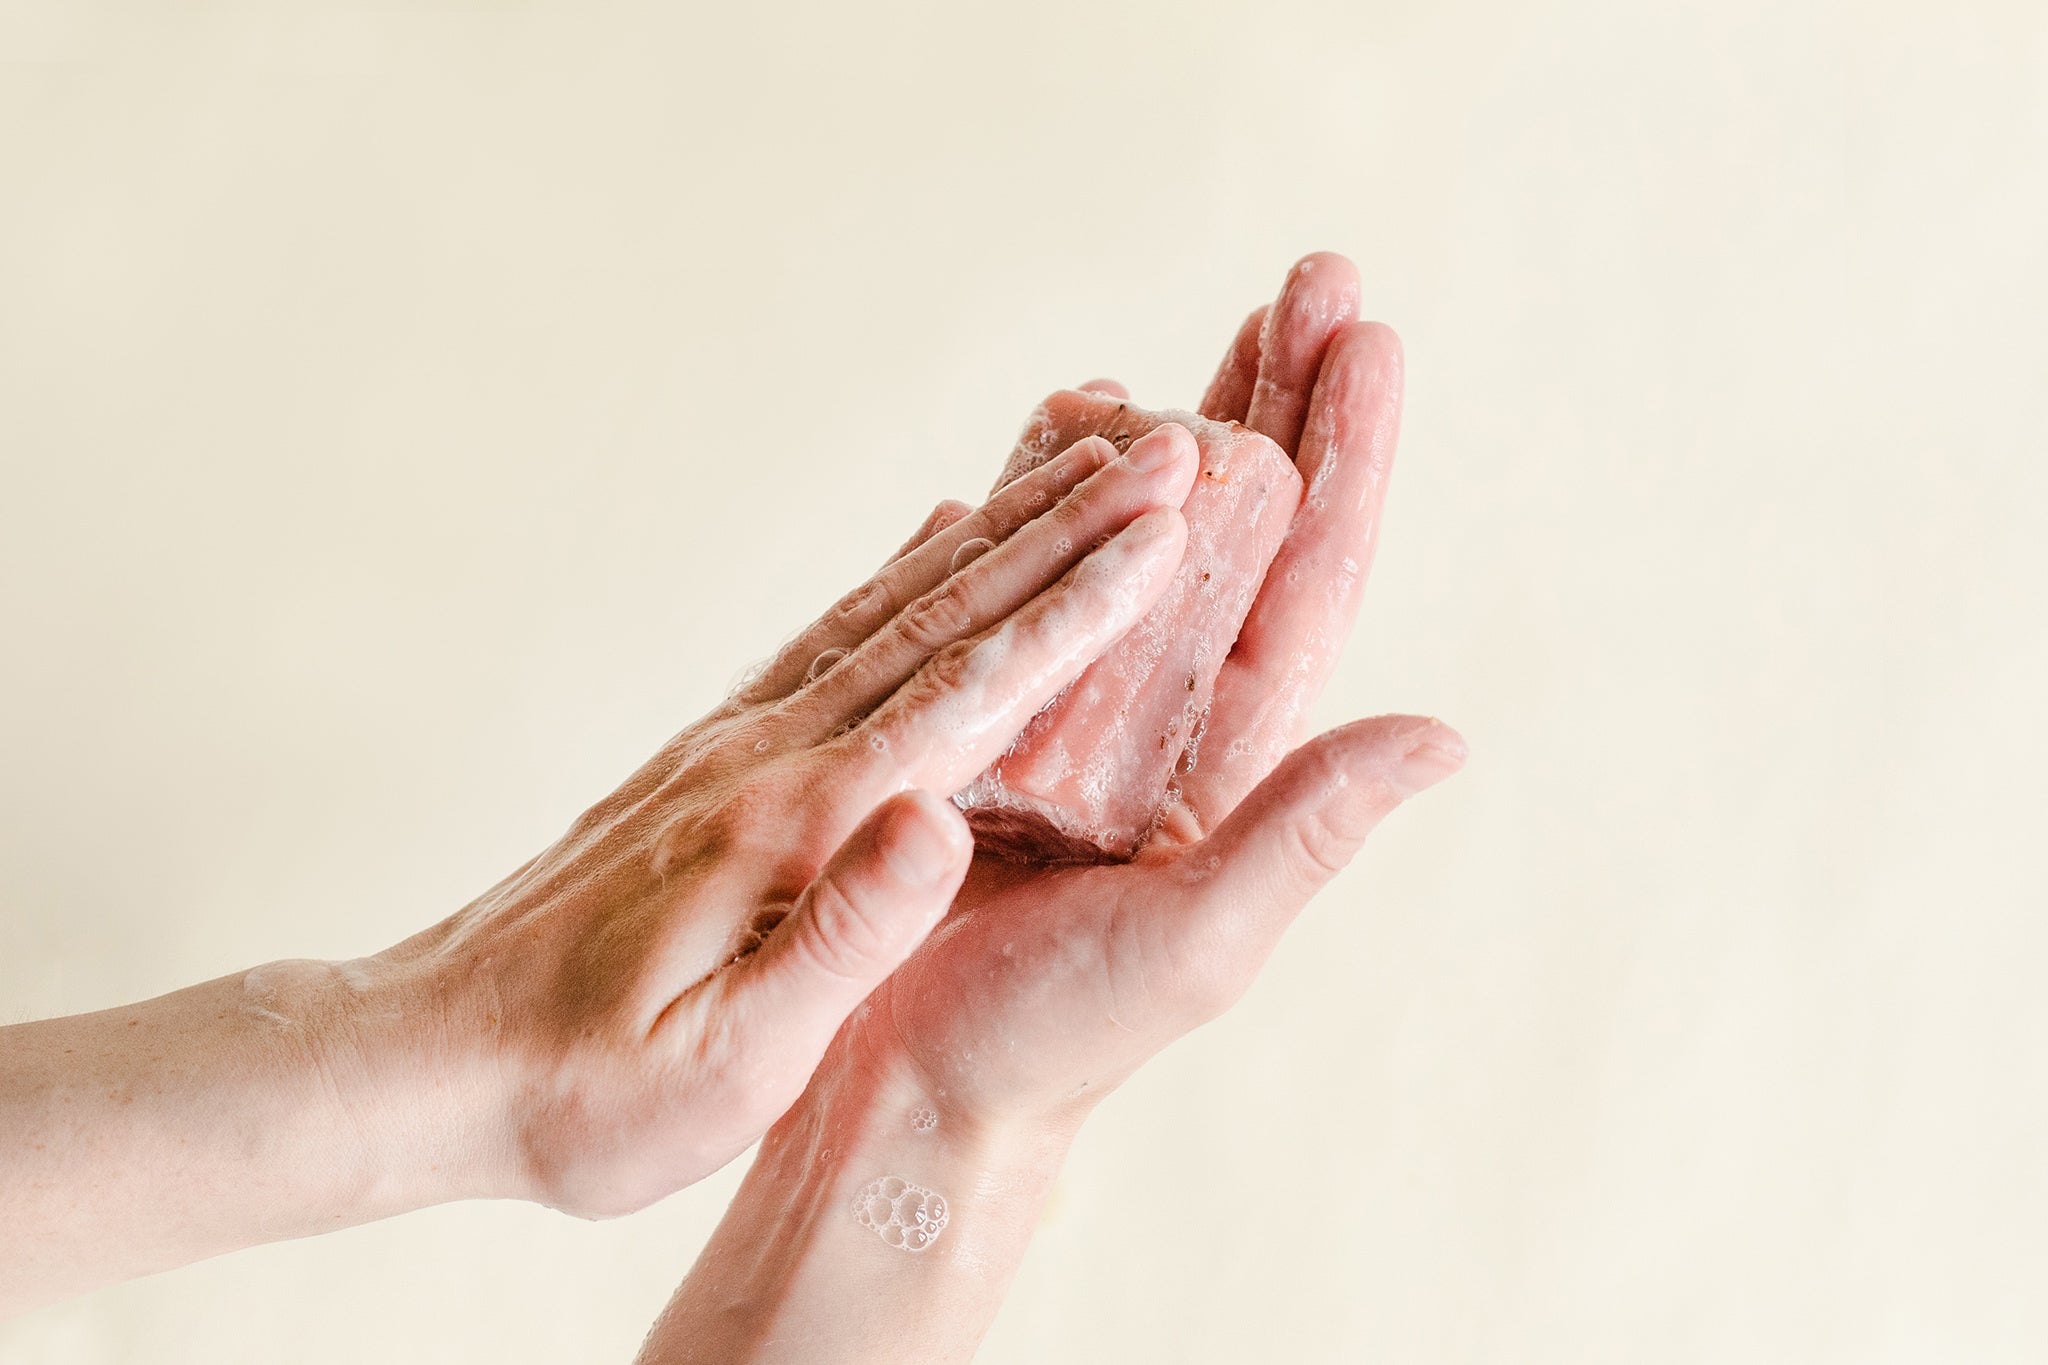 Image of a pair of hands washing with all natural bar soap.